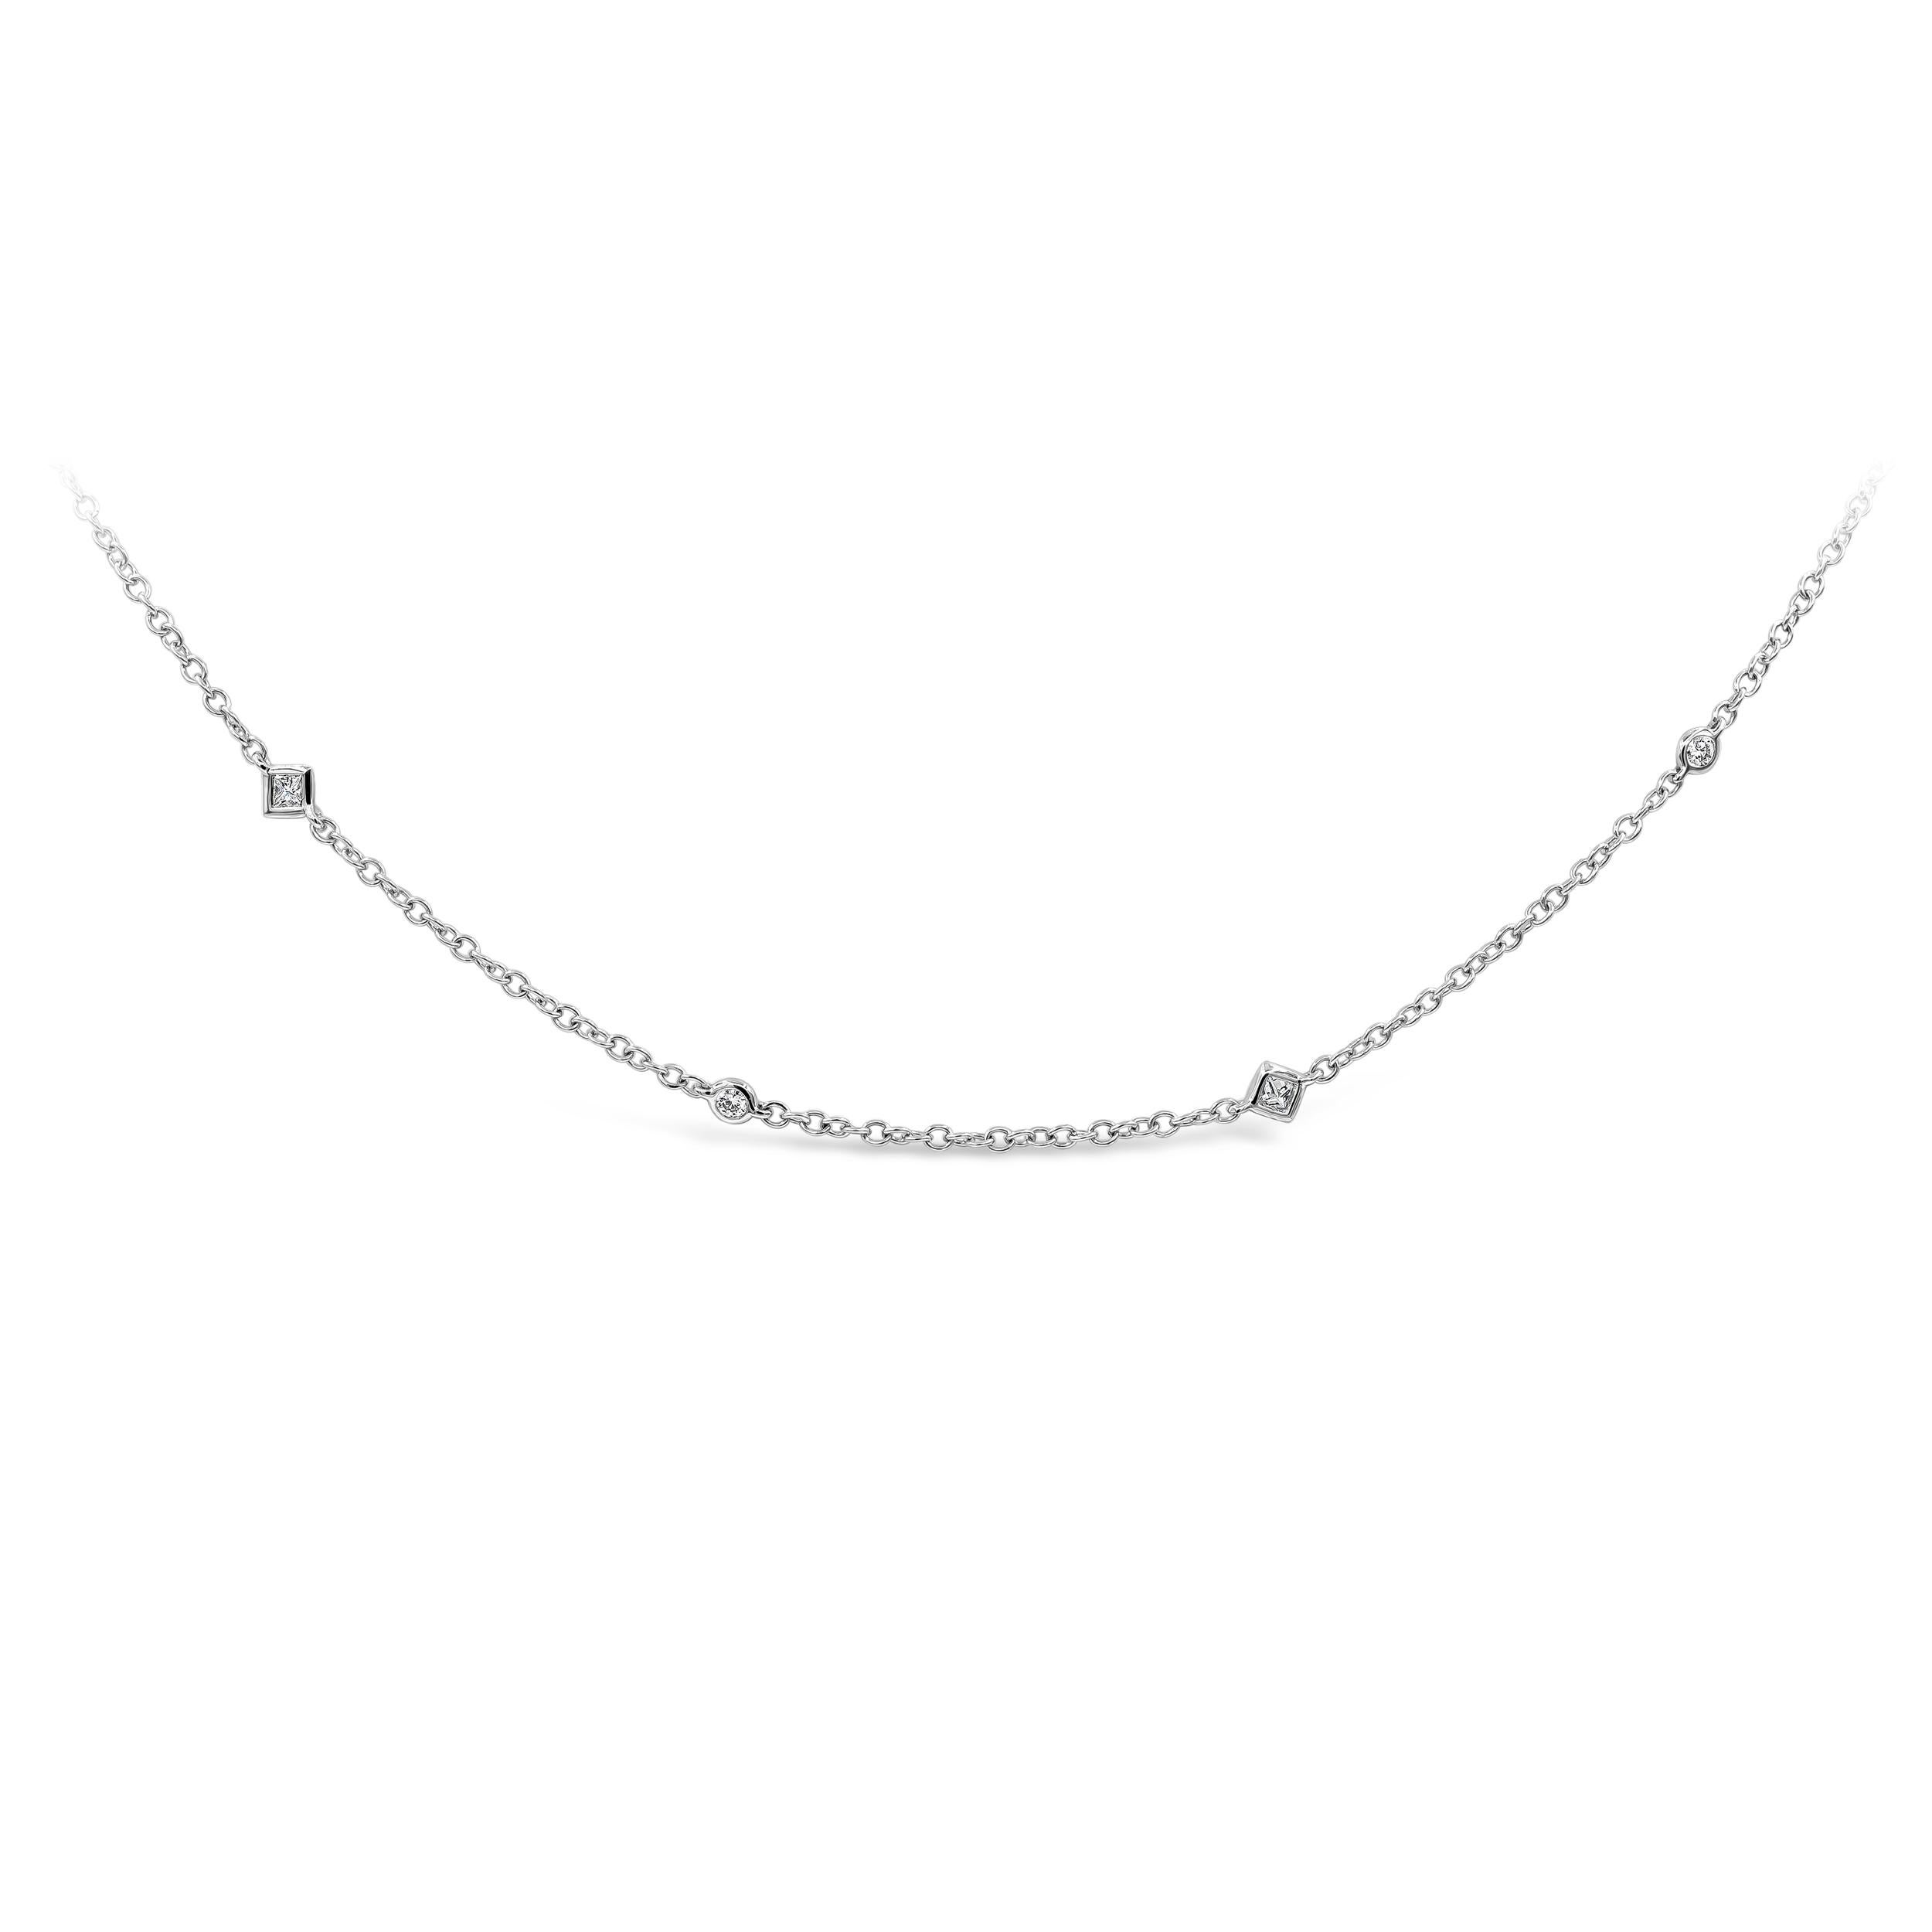 A simple diamonds by the yard necklace showcasing alternating round and princess cut diamonds, weighing 0.36 carats total bezel. Set and evenly spaced in an 18K White Gold chain, 16 inches in length. Perfect for your everyday use. 

Roman Malakov is